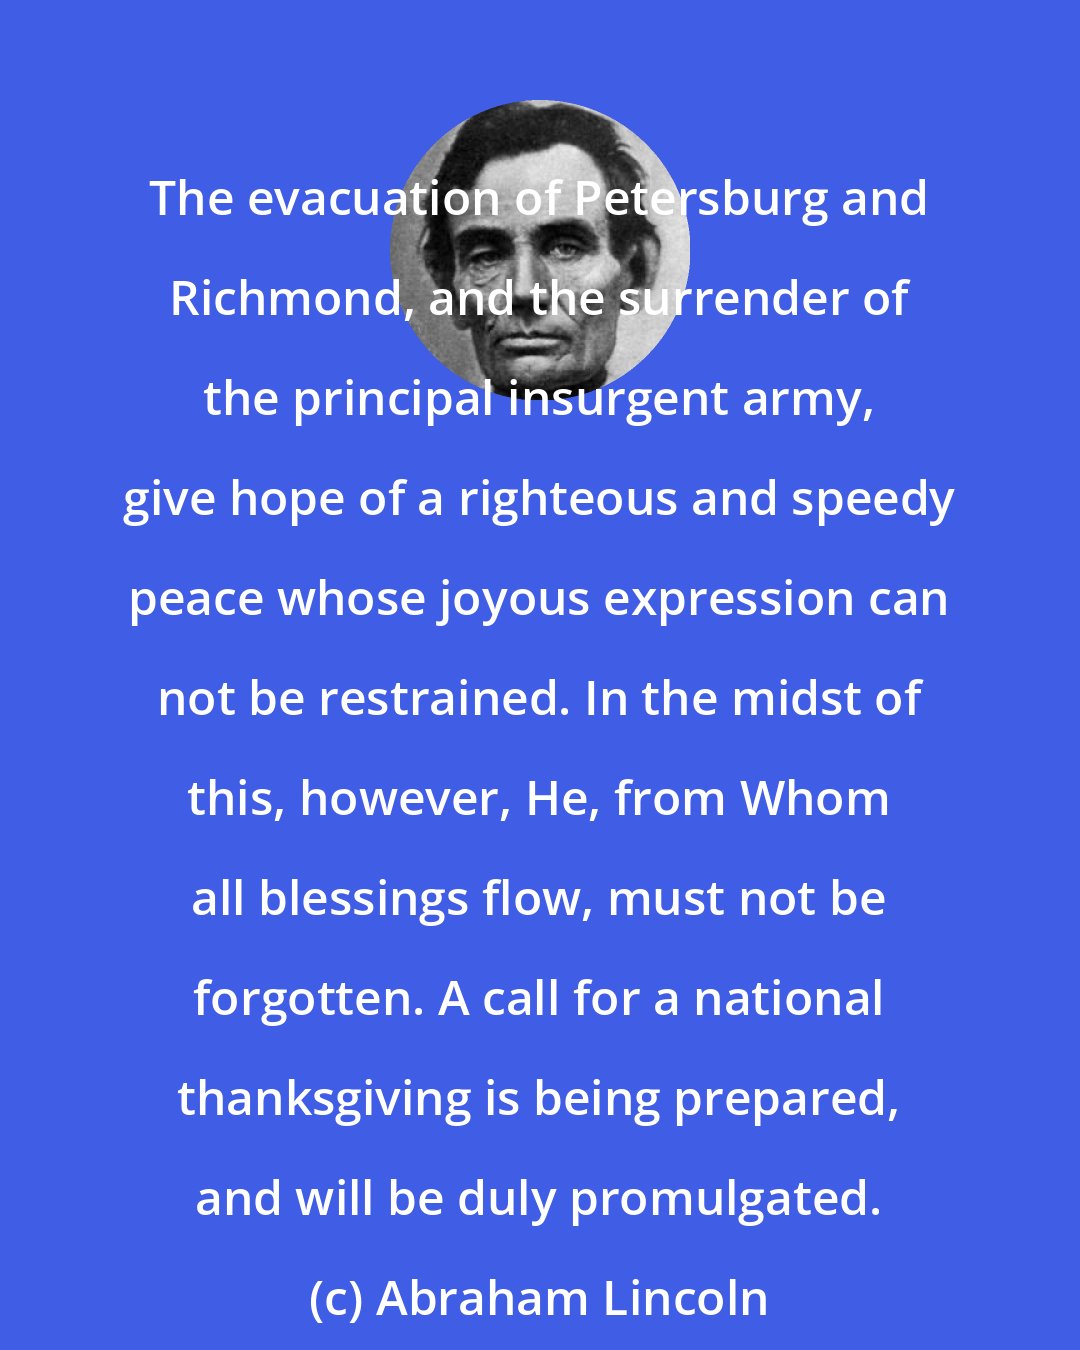 Abraham Lincoln: The evacuation of Petersburg and Richmond, and the surrender of the principal insurgent army, give hope of a righteous and speedy peace whose joyous expression can not be restrained. In the midst of this, however, He, from Whom all blessings flow, must not be forgotten. A call for a national thanksgiving is being prepared, and will be duly promulgated.